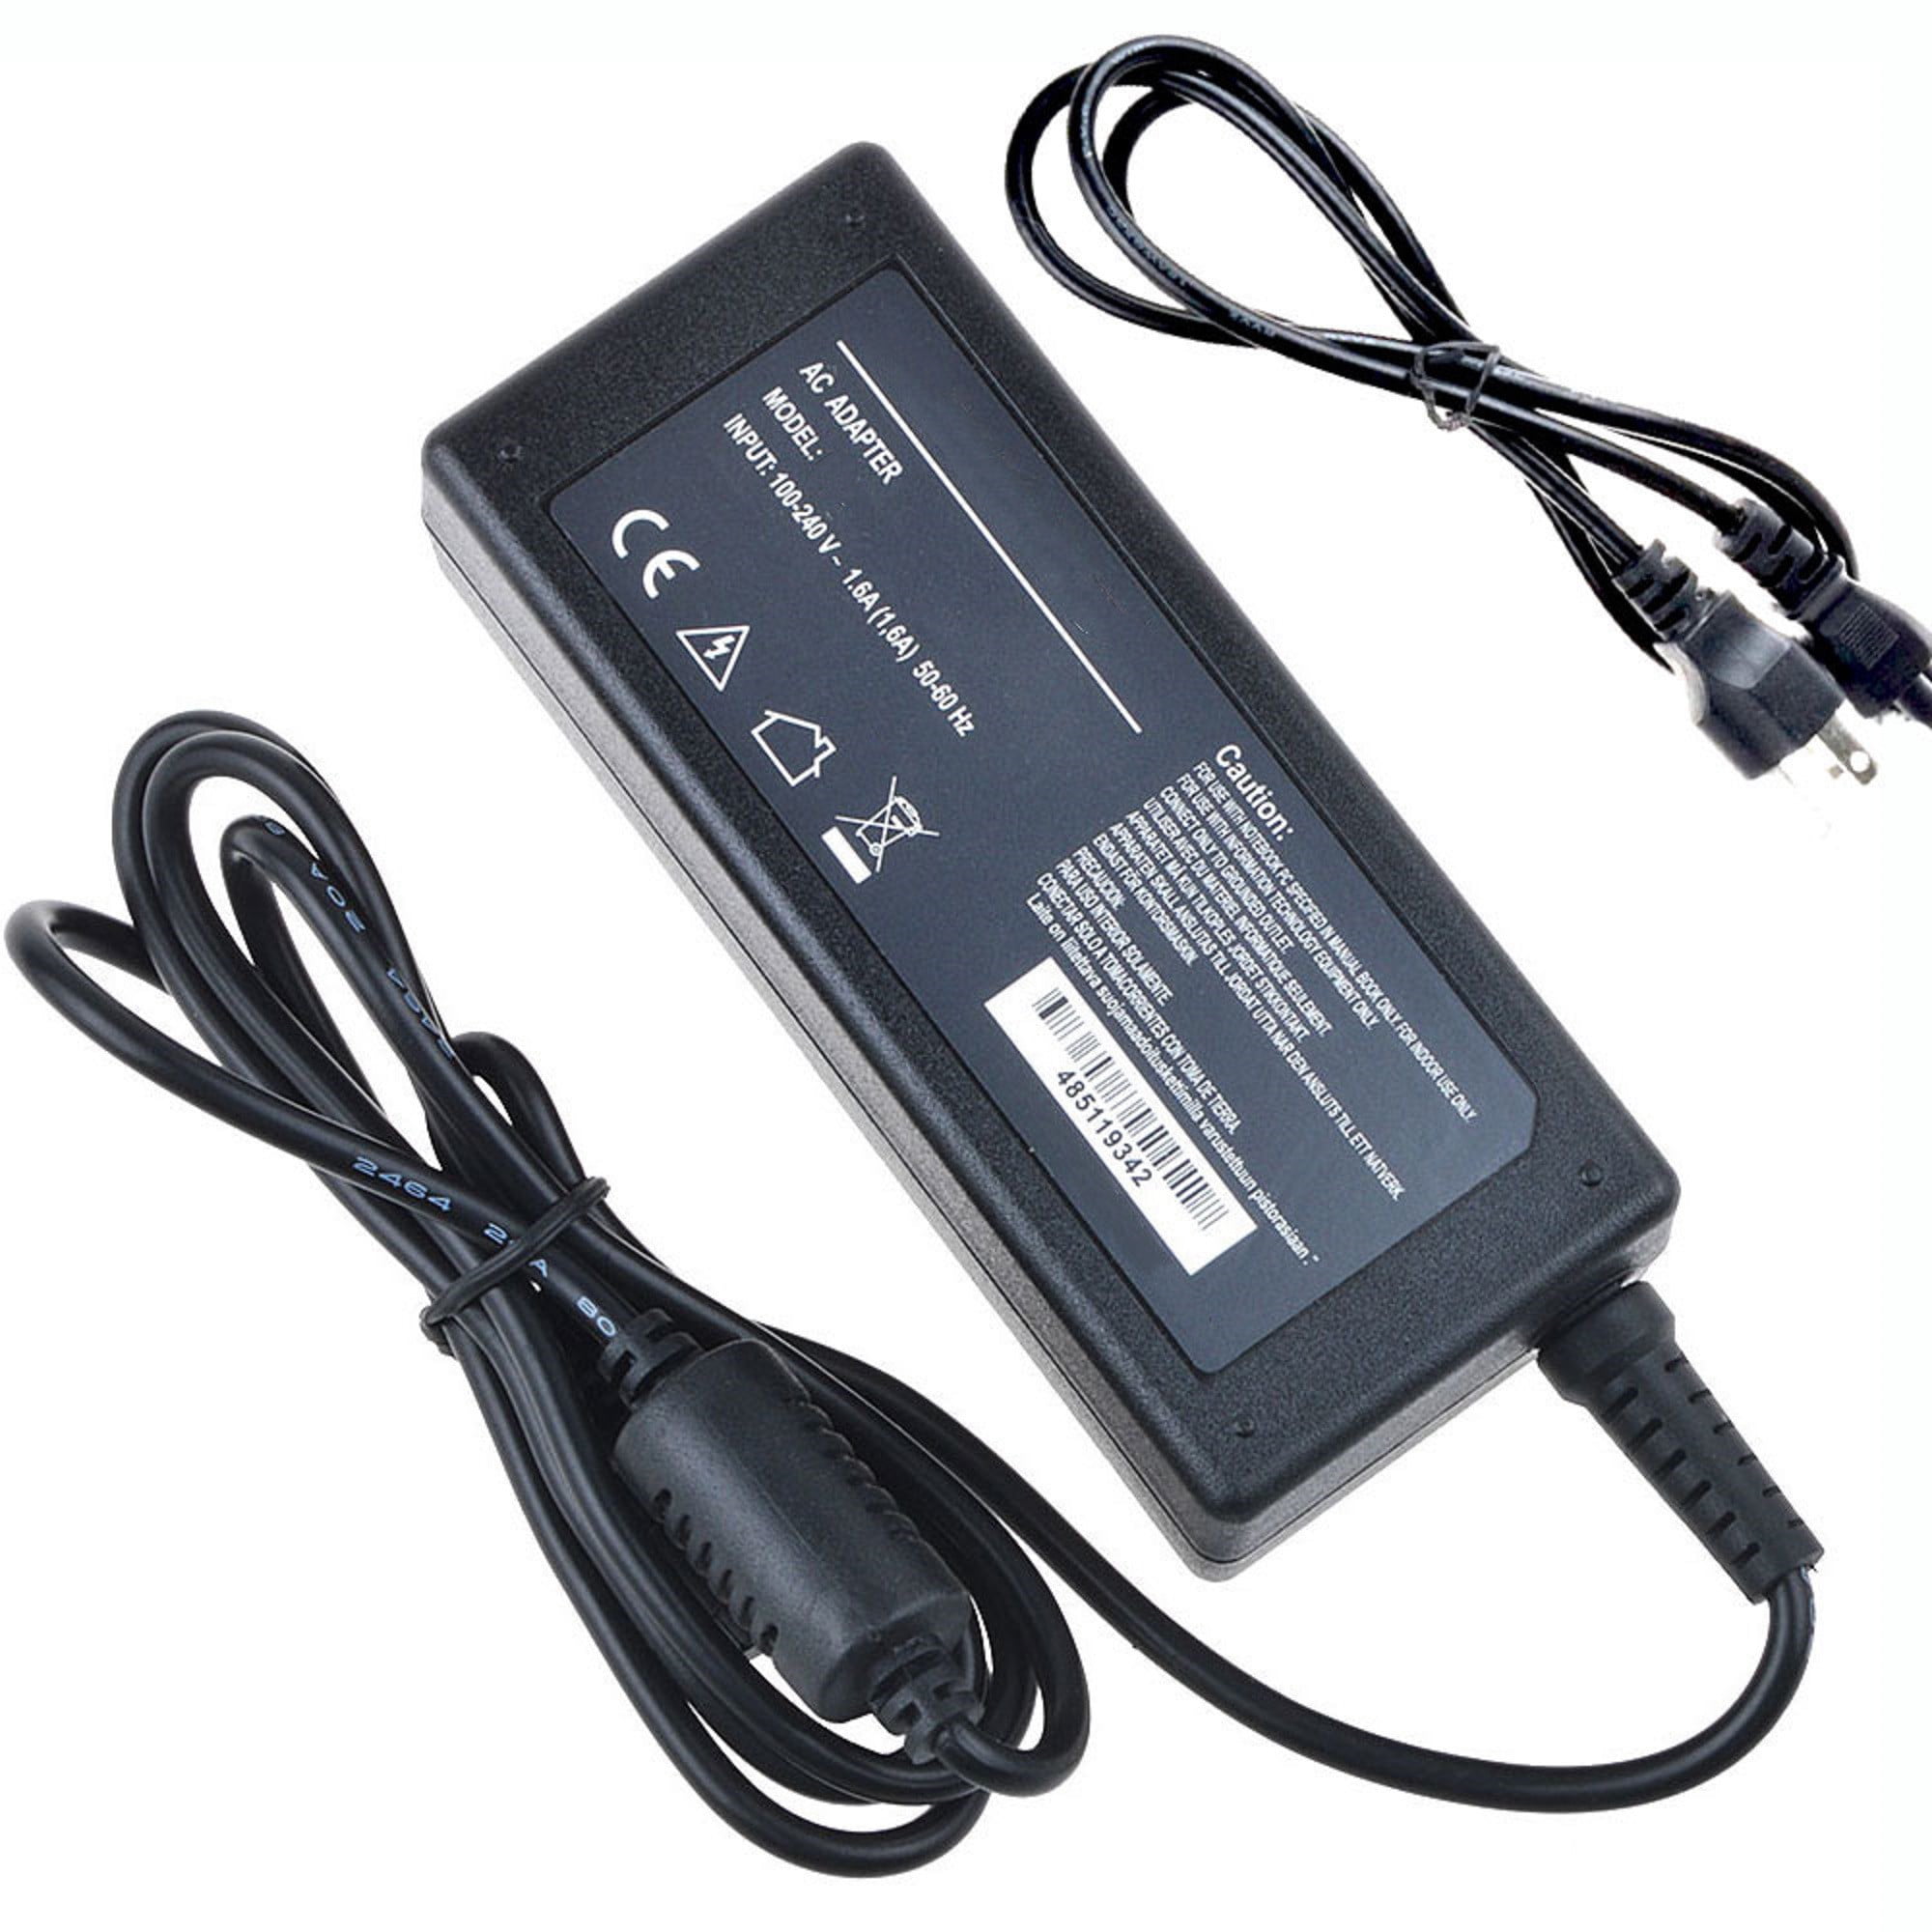 Toshiba Thrive Tablet PC AT105-T108S power supply ac adapter cord cable charger 